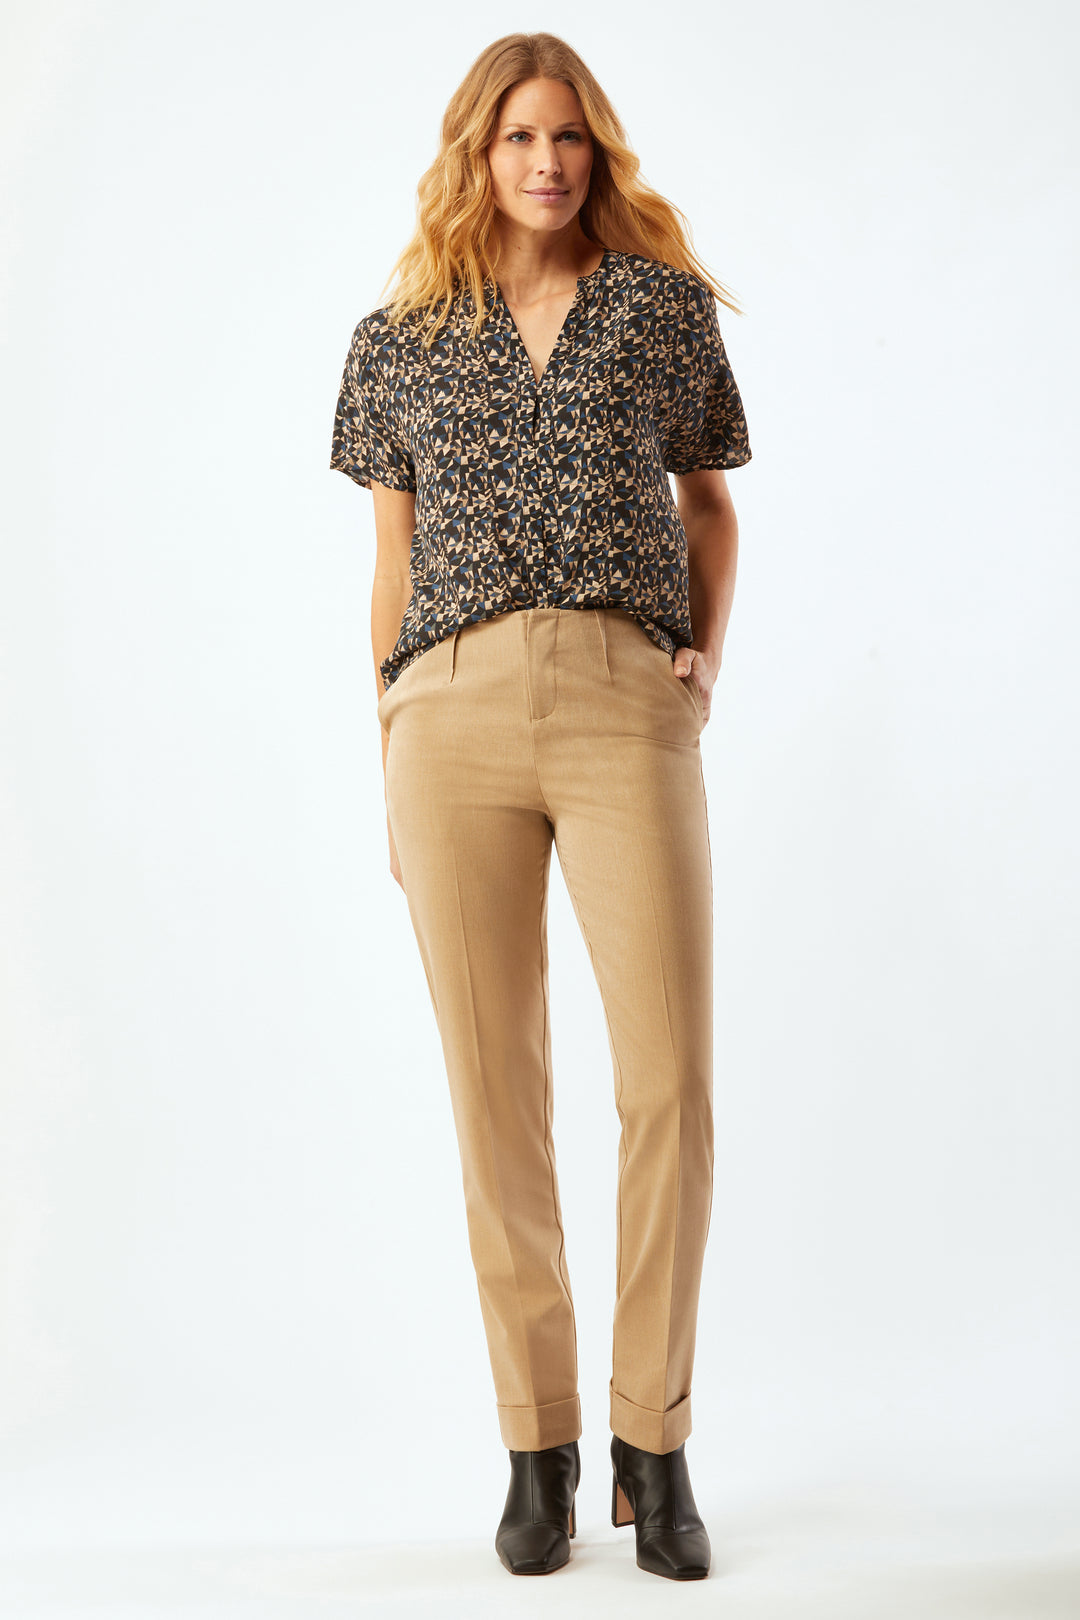 Gramercy Cuffed Pant With Raised Darts - Camel